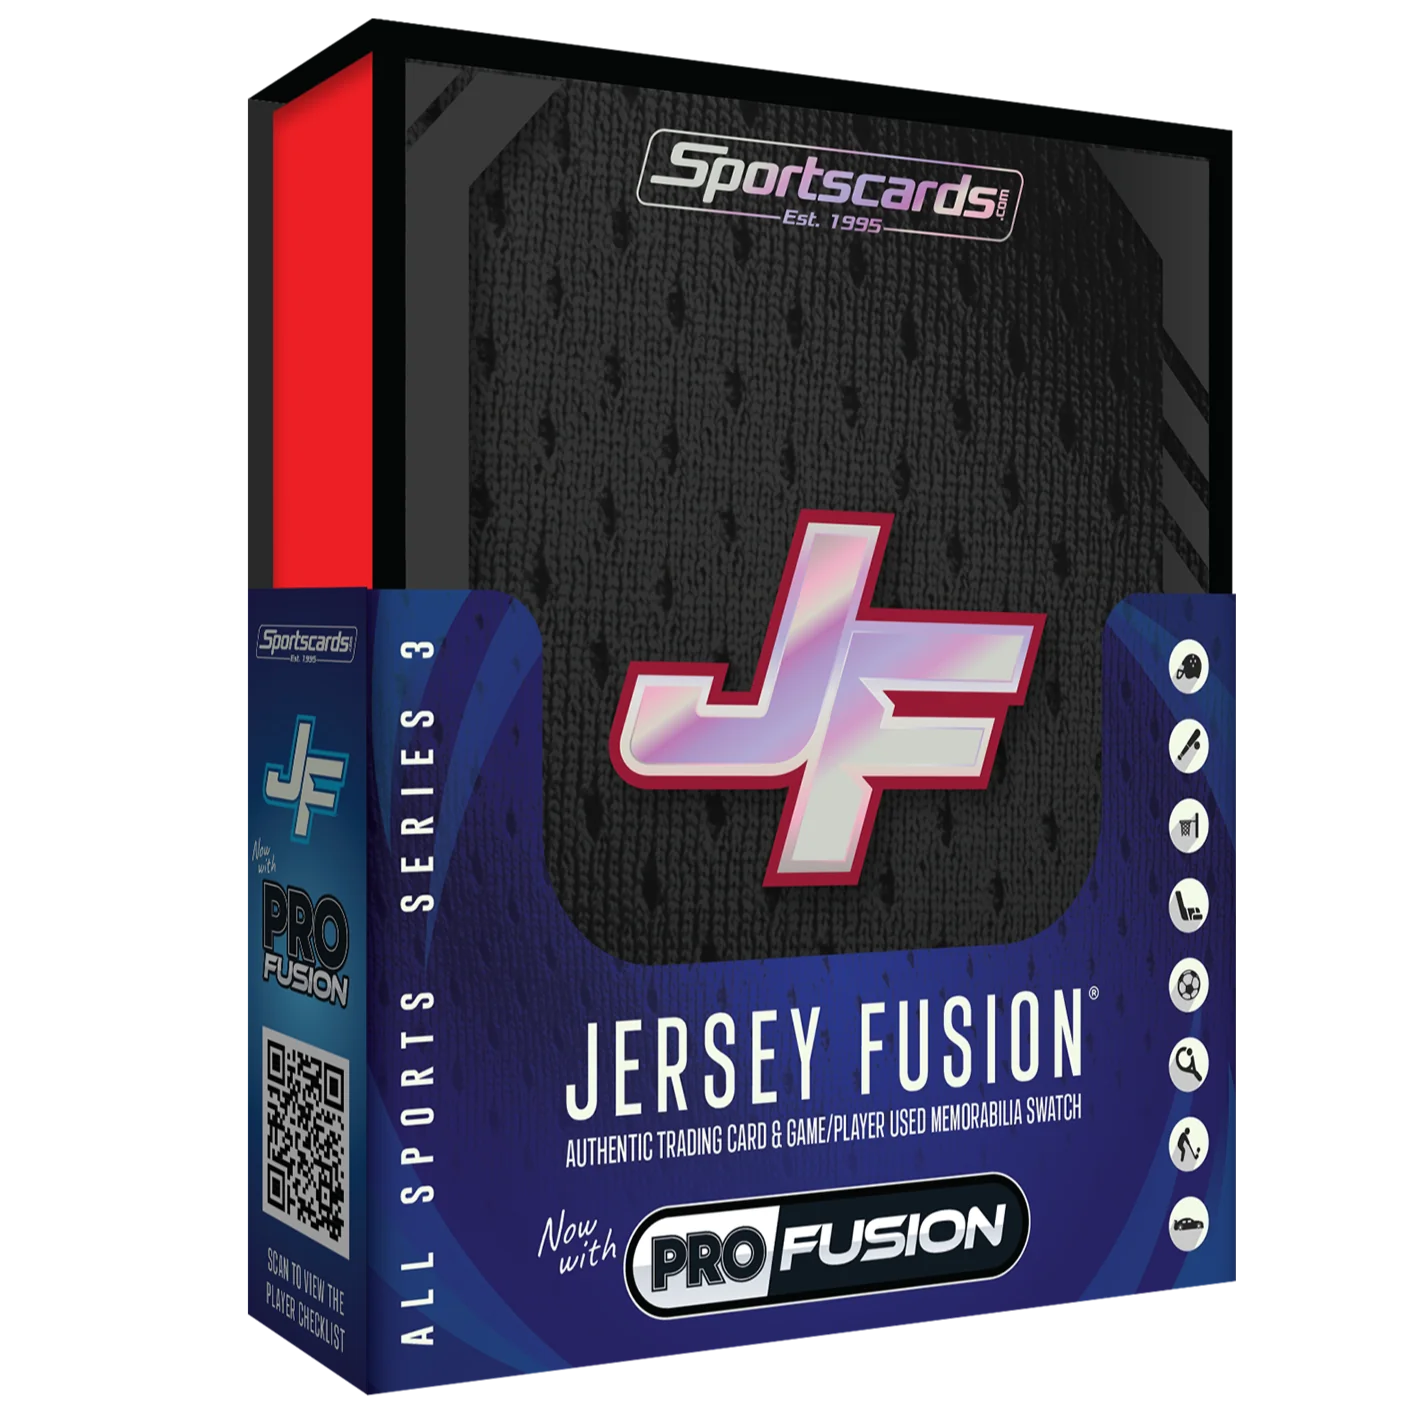 Sportscards.com Jersey Fusion All Sports Series 3